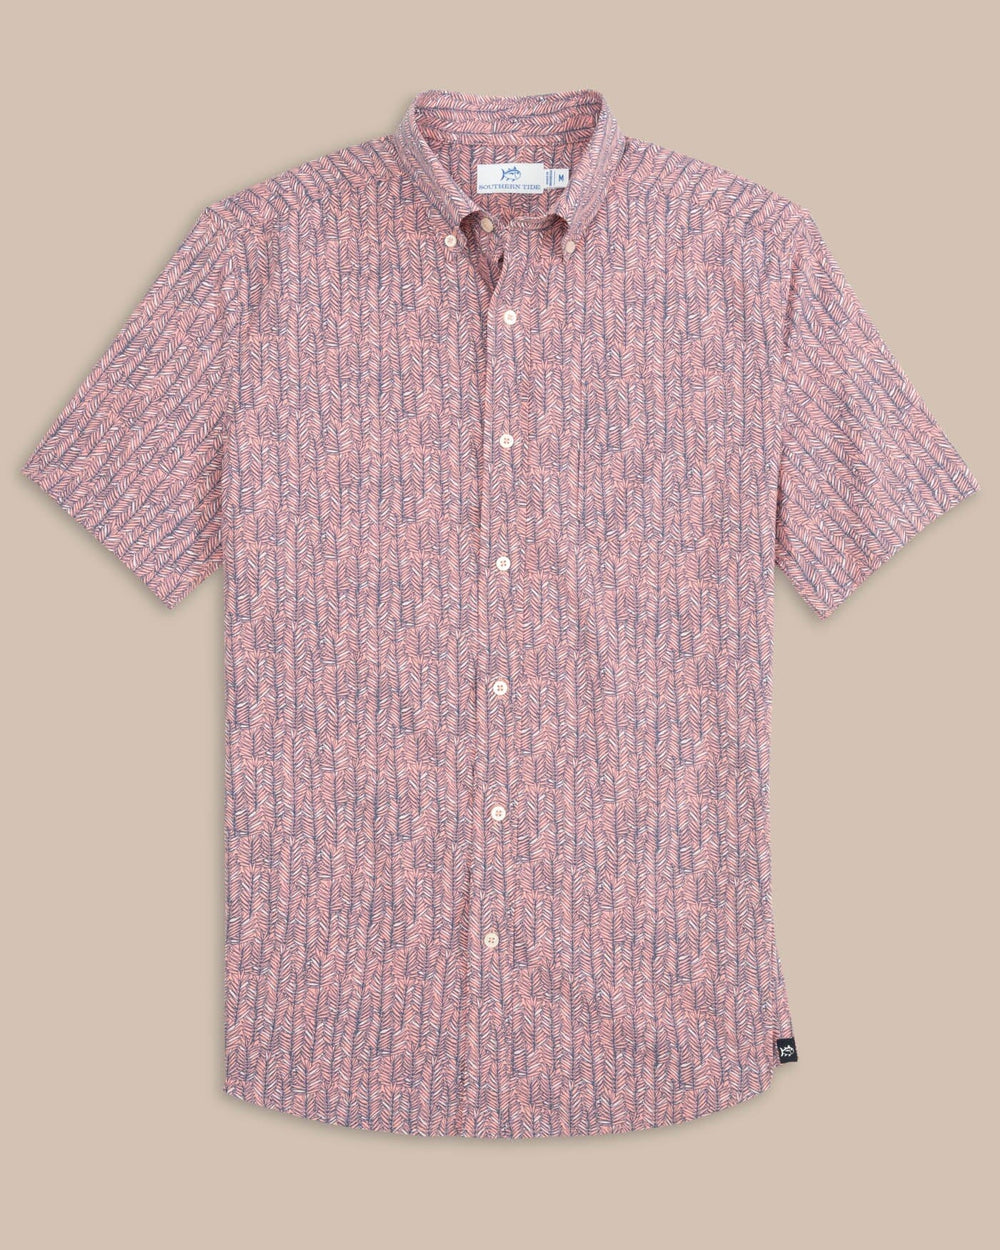 The front view of the Southern Tide Leagally Frond Intercoastal Short Sleeve Sport Shirt by Southern Tide - Flamingo Pink